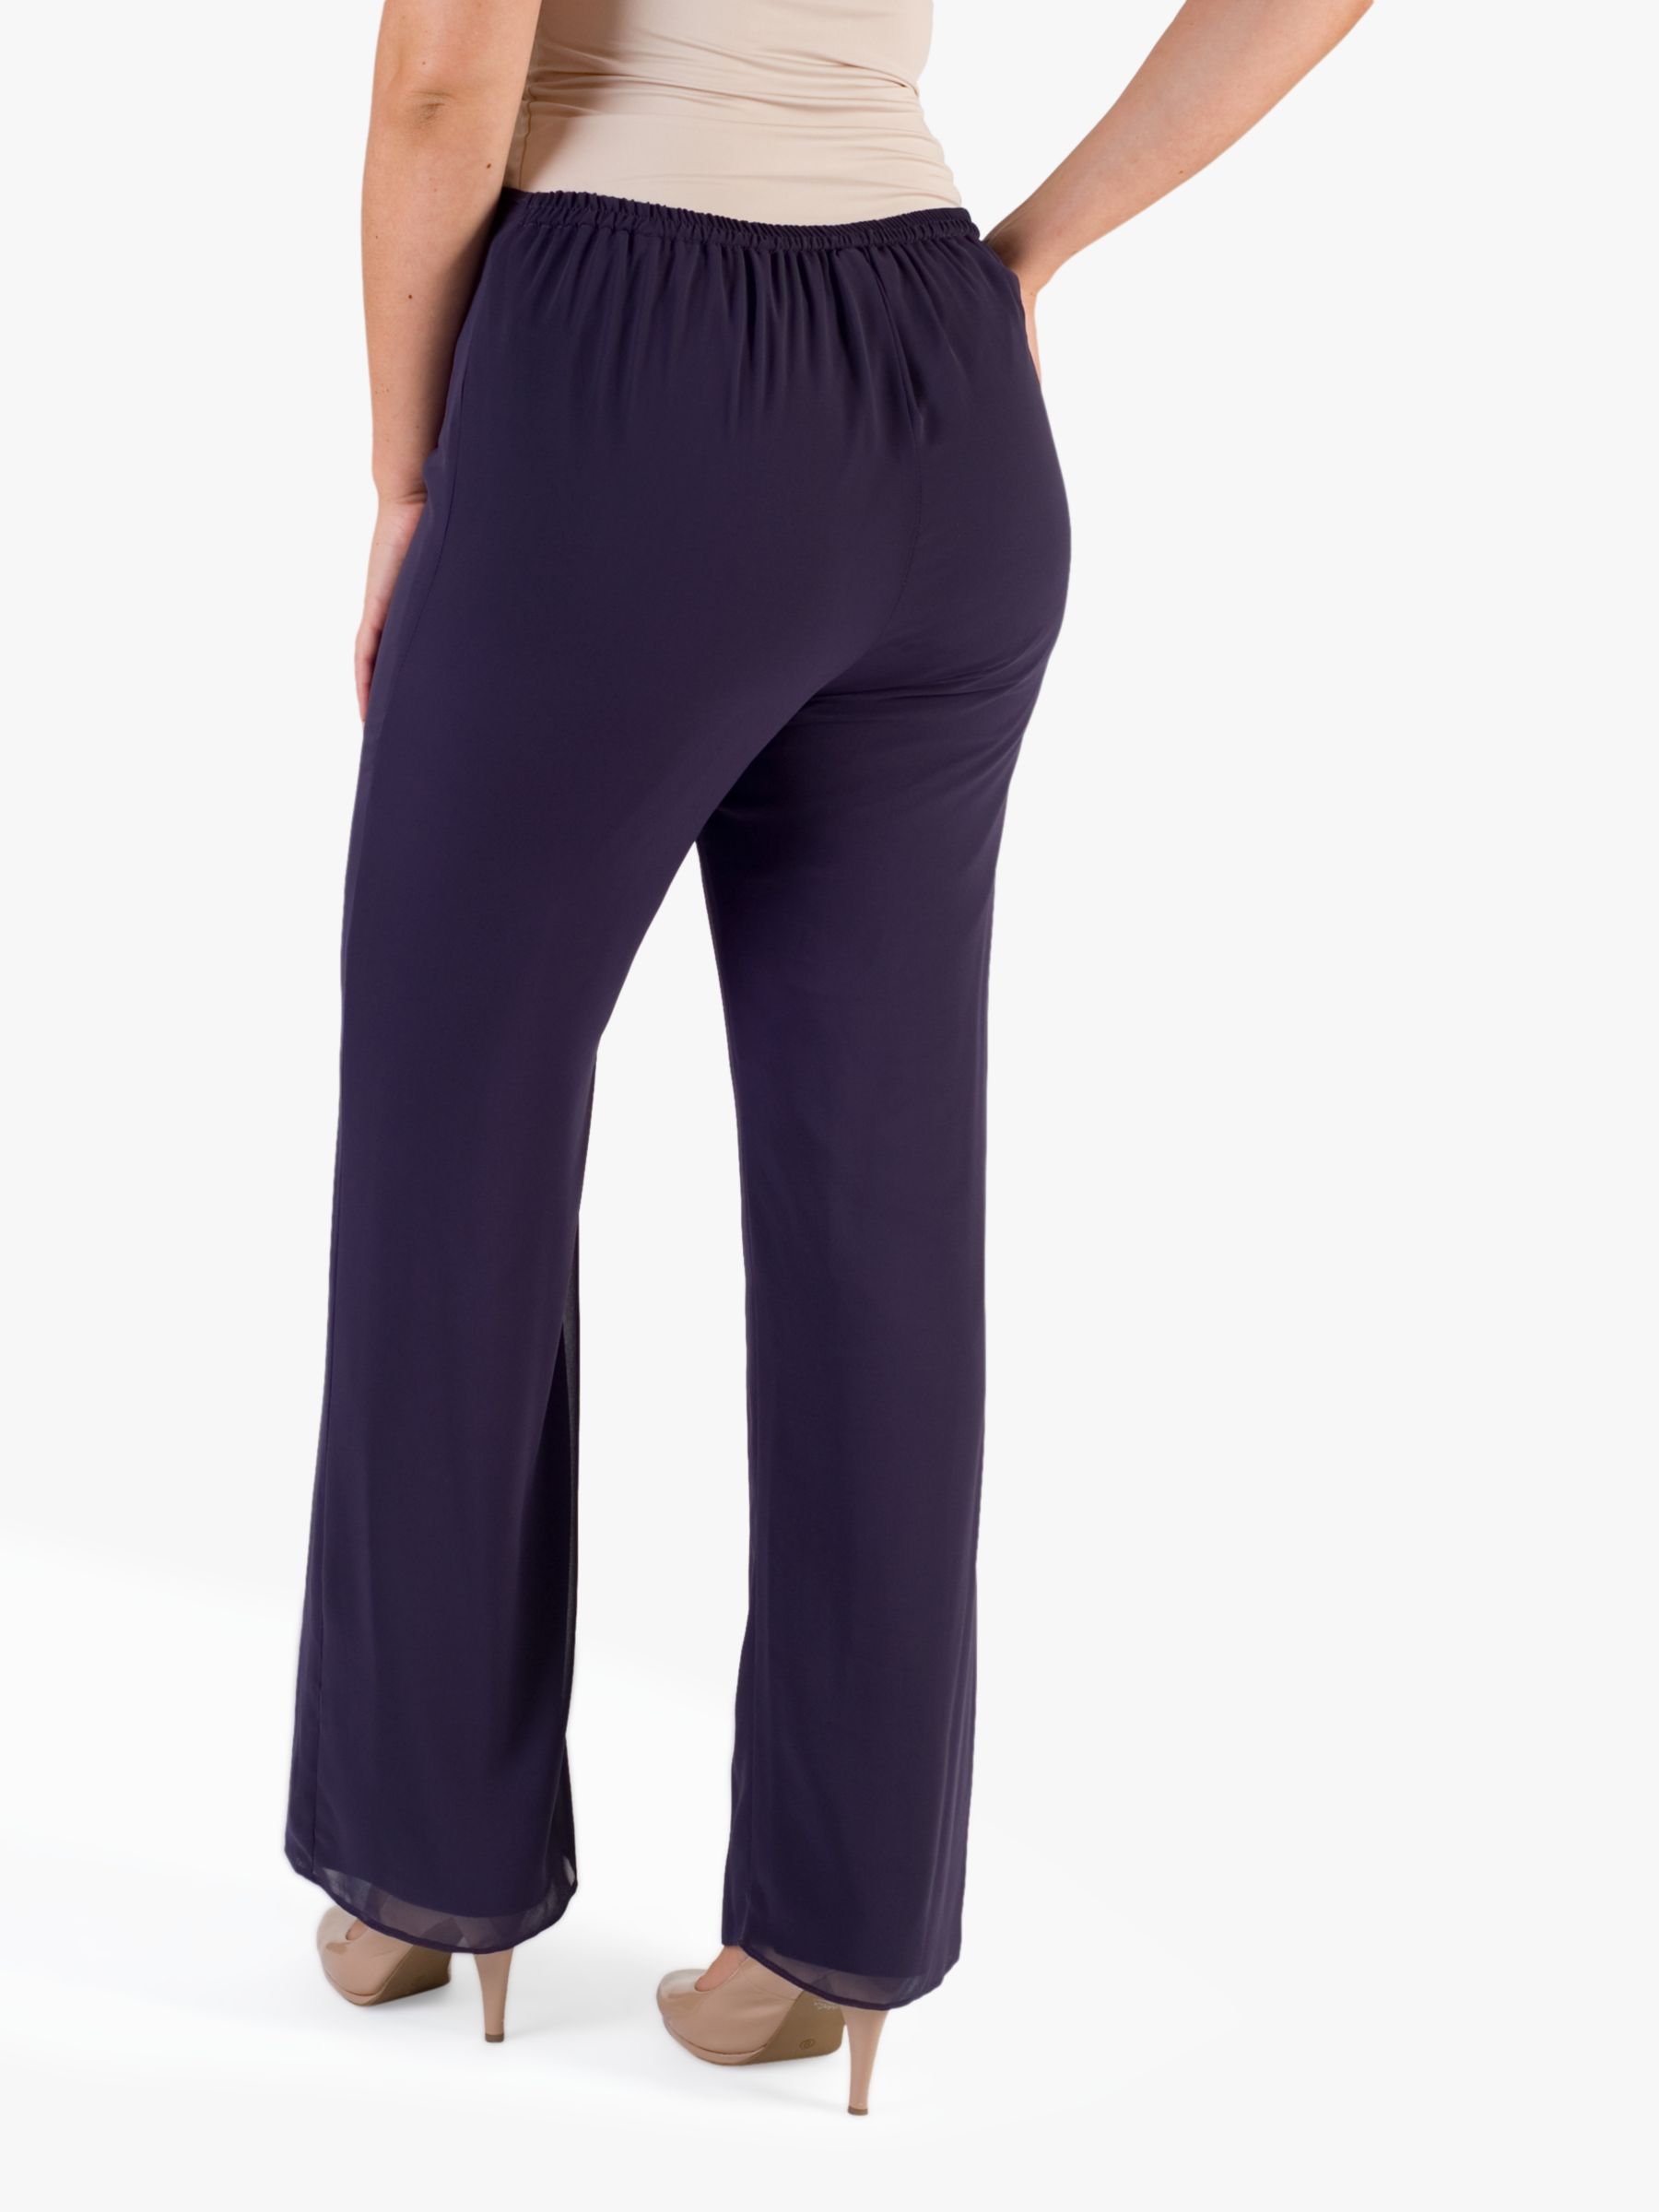 Chesca Jersey Lined Chiffon Trousers, Grape at John Lewis & Partners